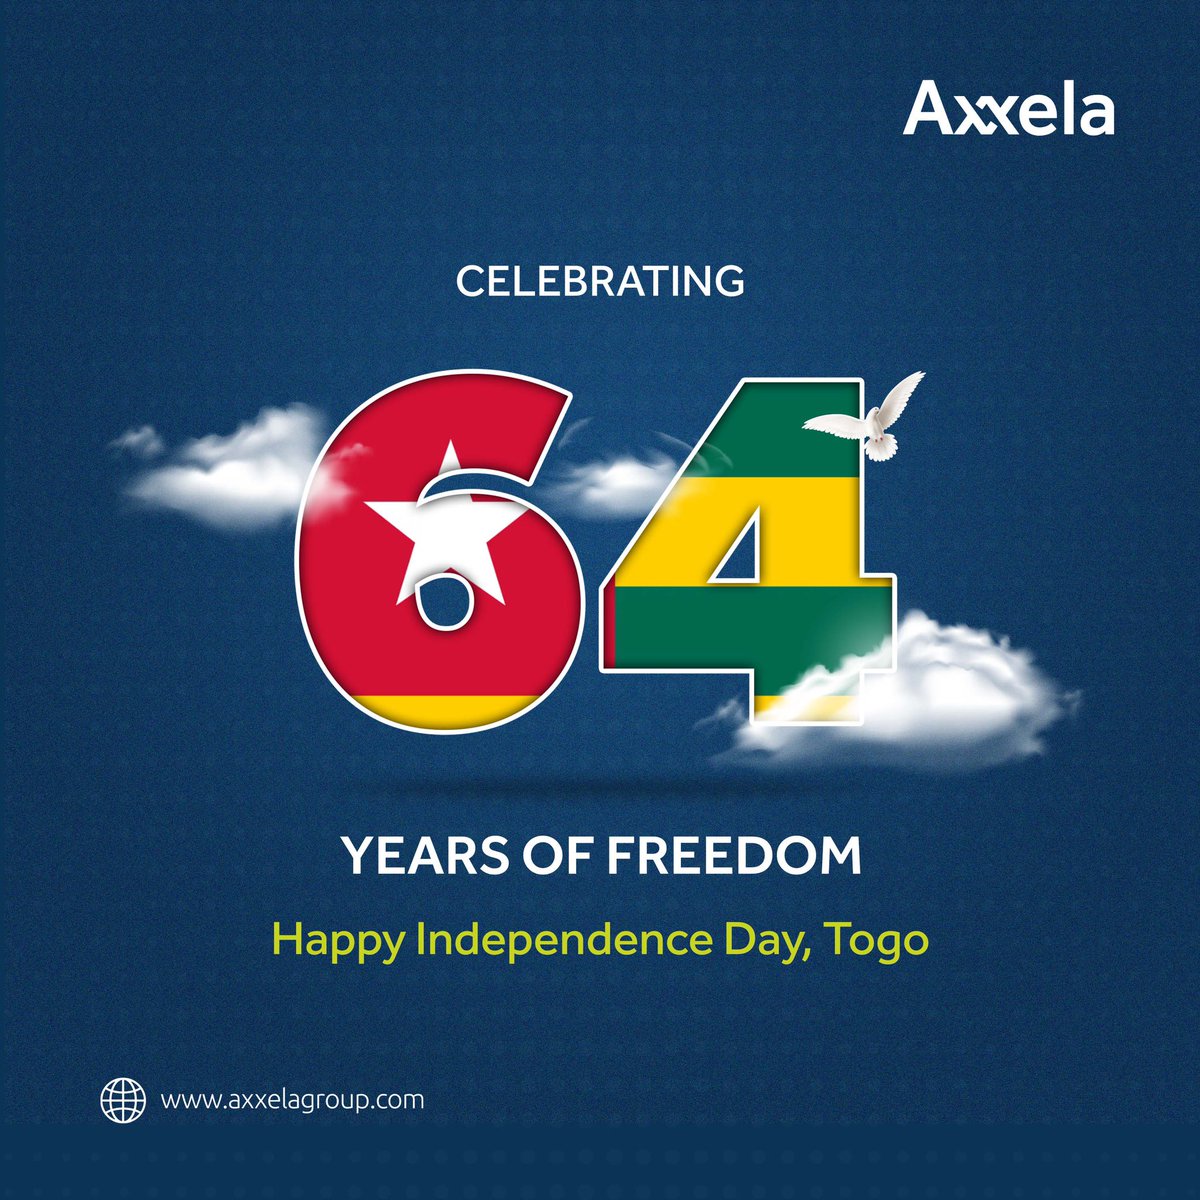 We wish the Togolese people a happy National Independence Day. Over the last decade, we have seen Togo demonstrate its economic growth potential and redoubled our efforts to support efficient, sustainable energy provision and industrialisation.